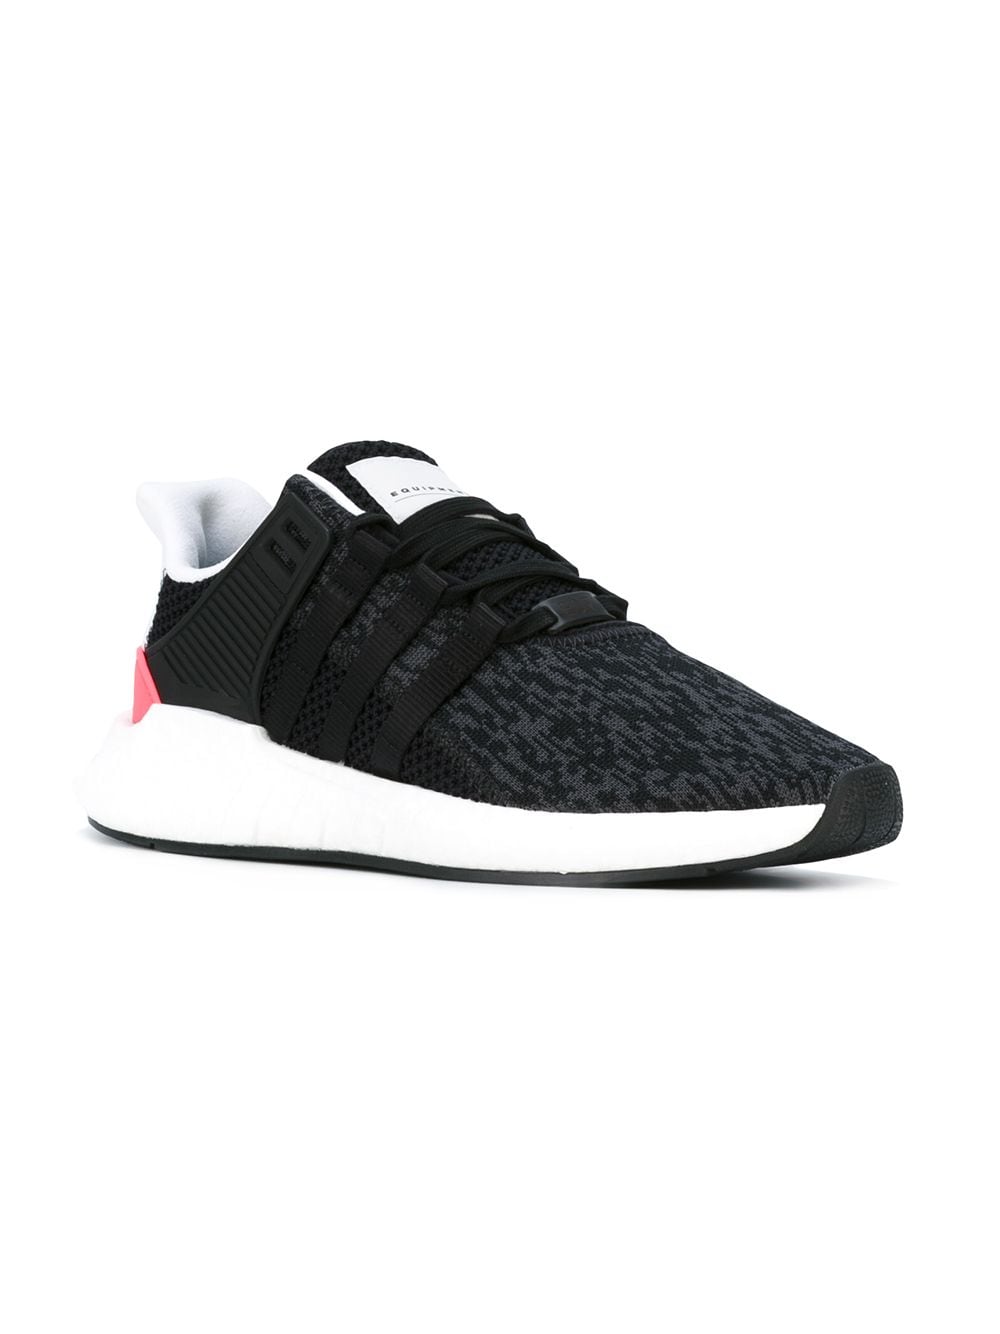 EQT Support 93/17 Sneakers - Farfetch